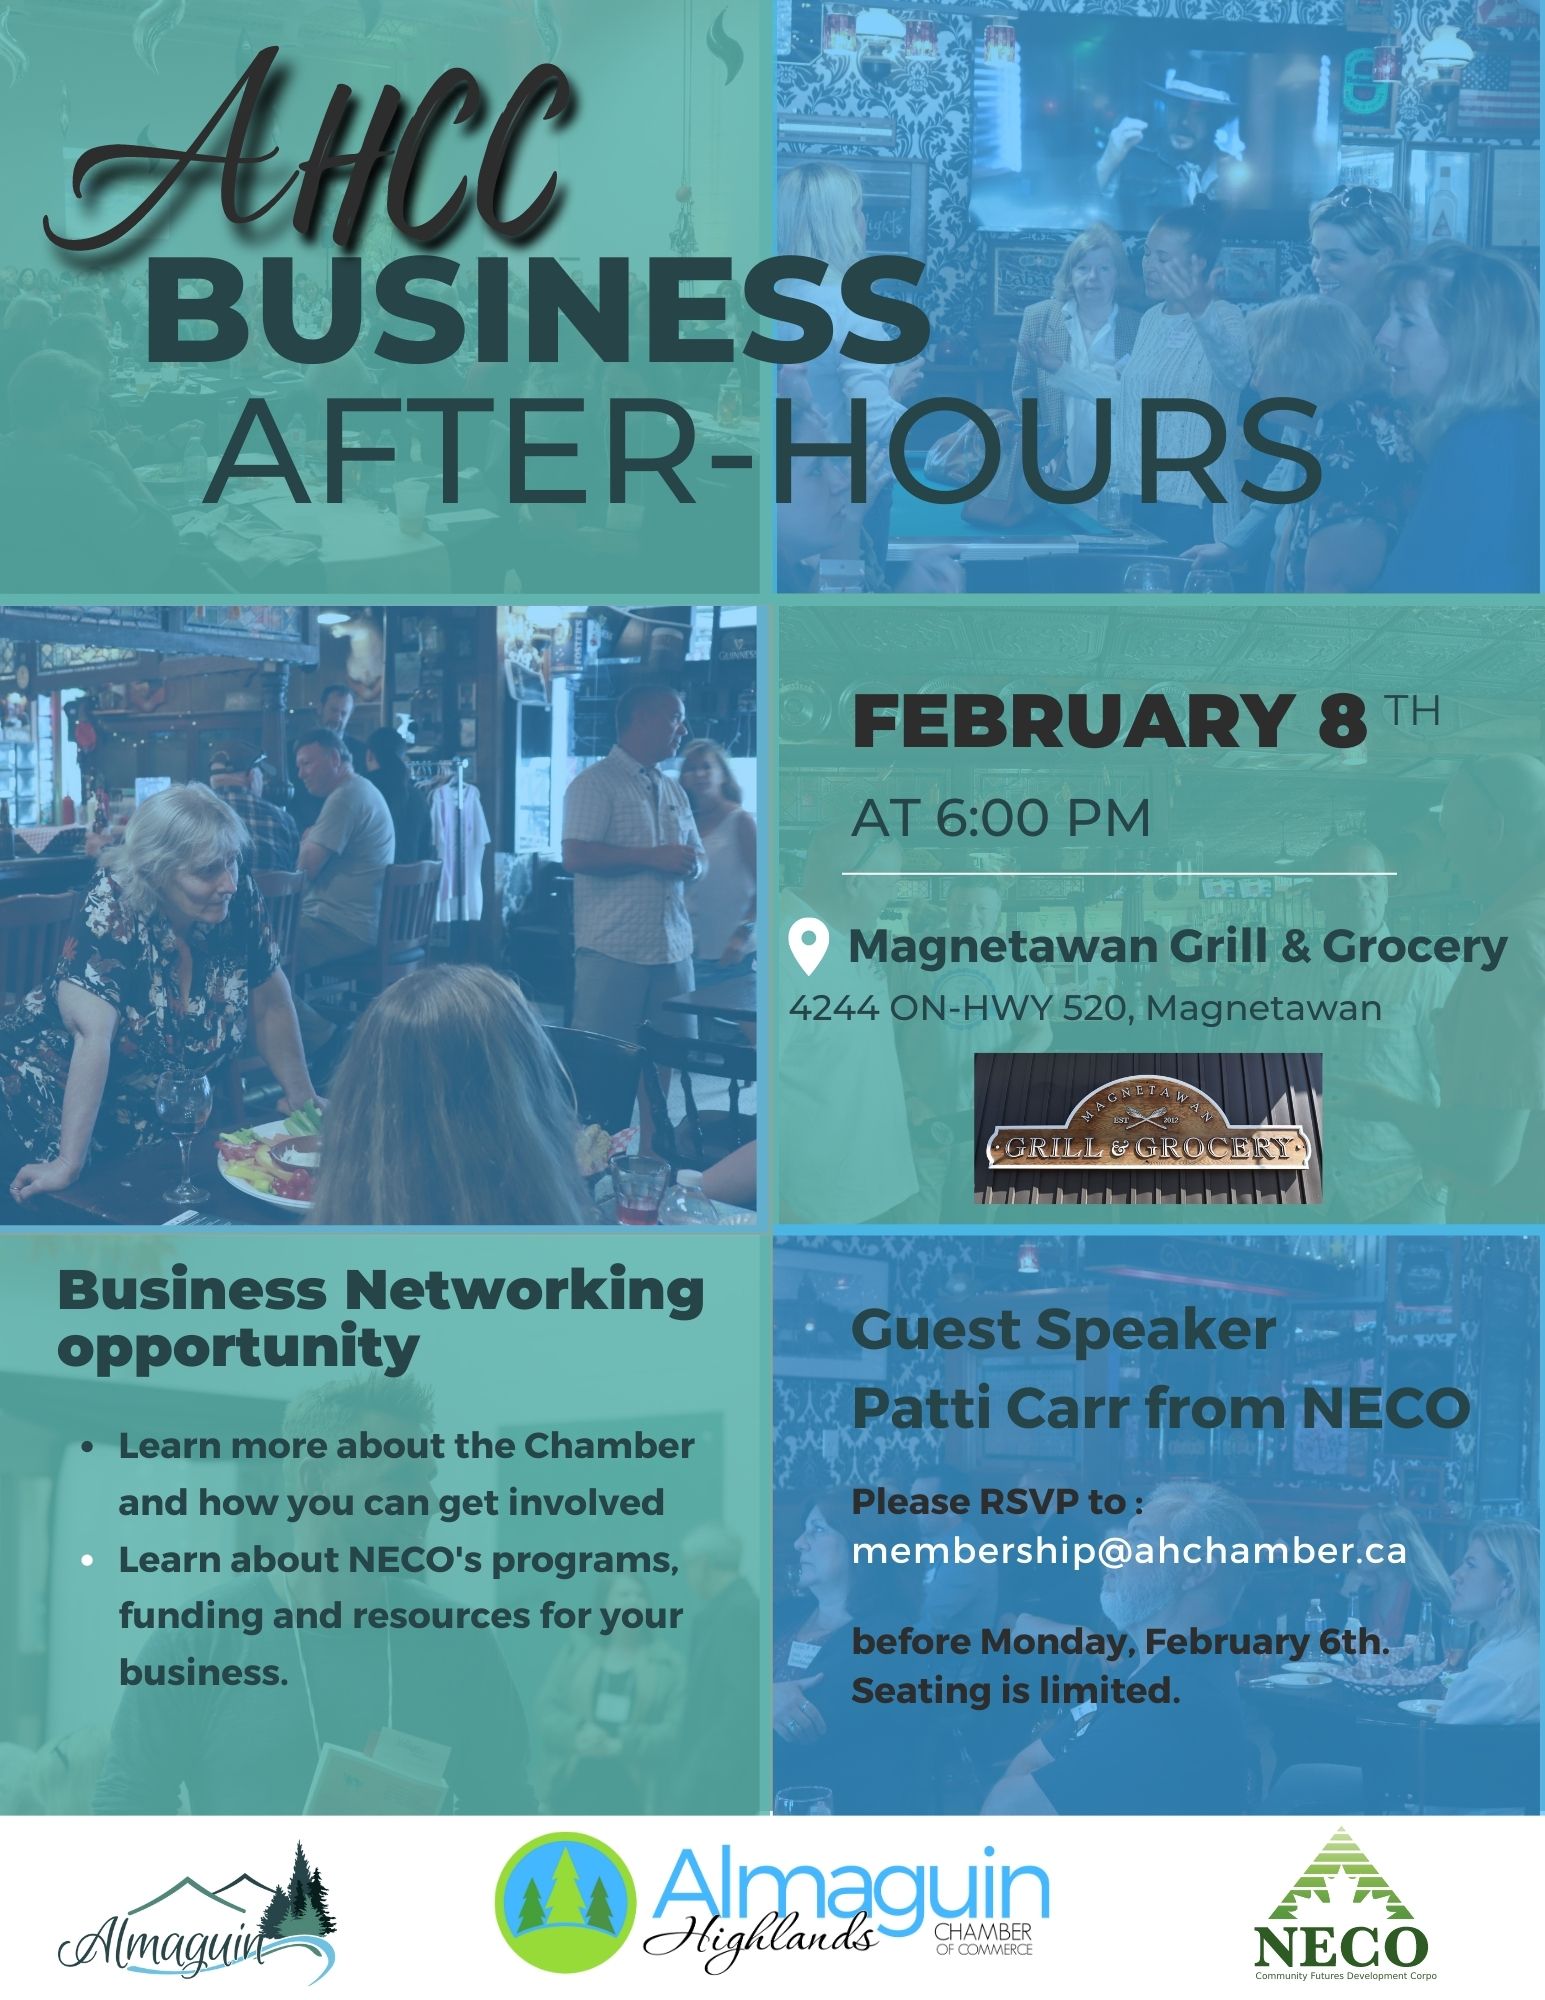 AHCC Business After-Hours